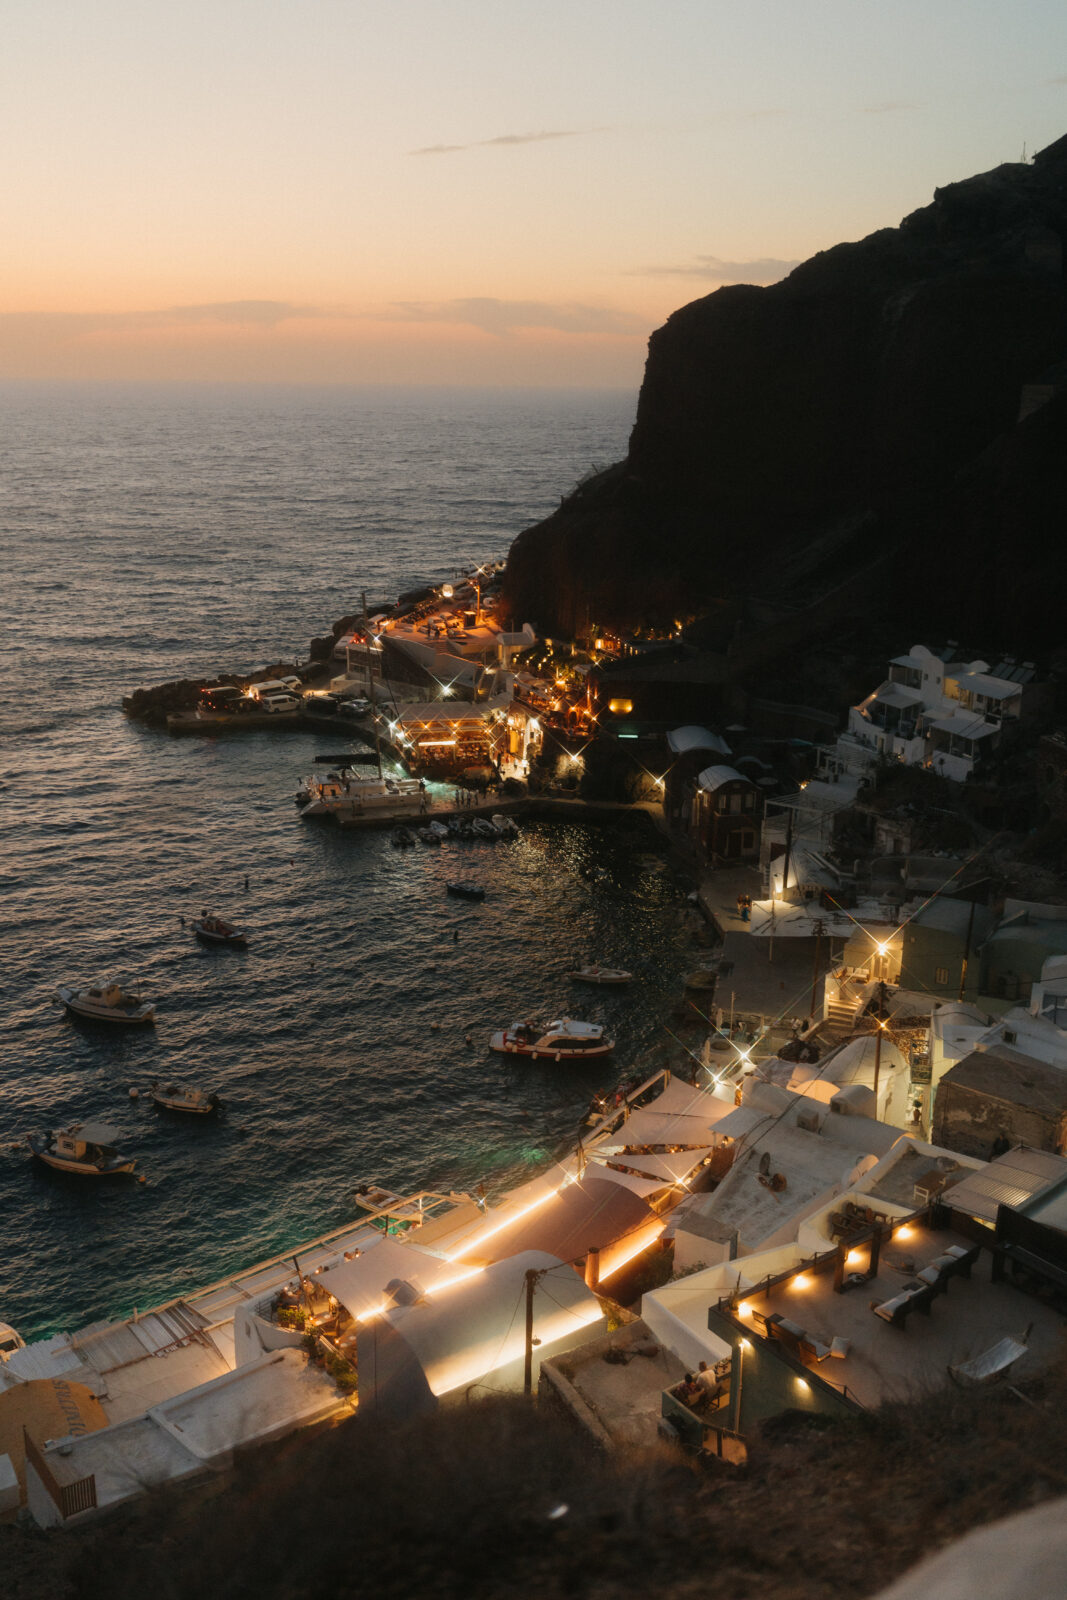 Santorini Greece at dusk, with boats floating near the shore and a sunset over the horizon.